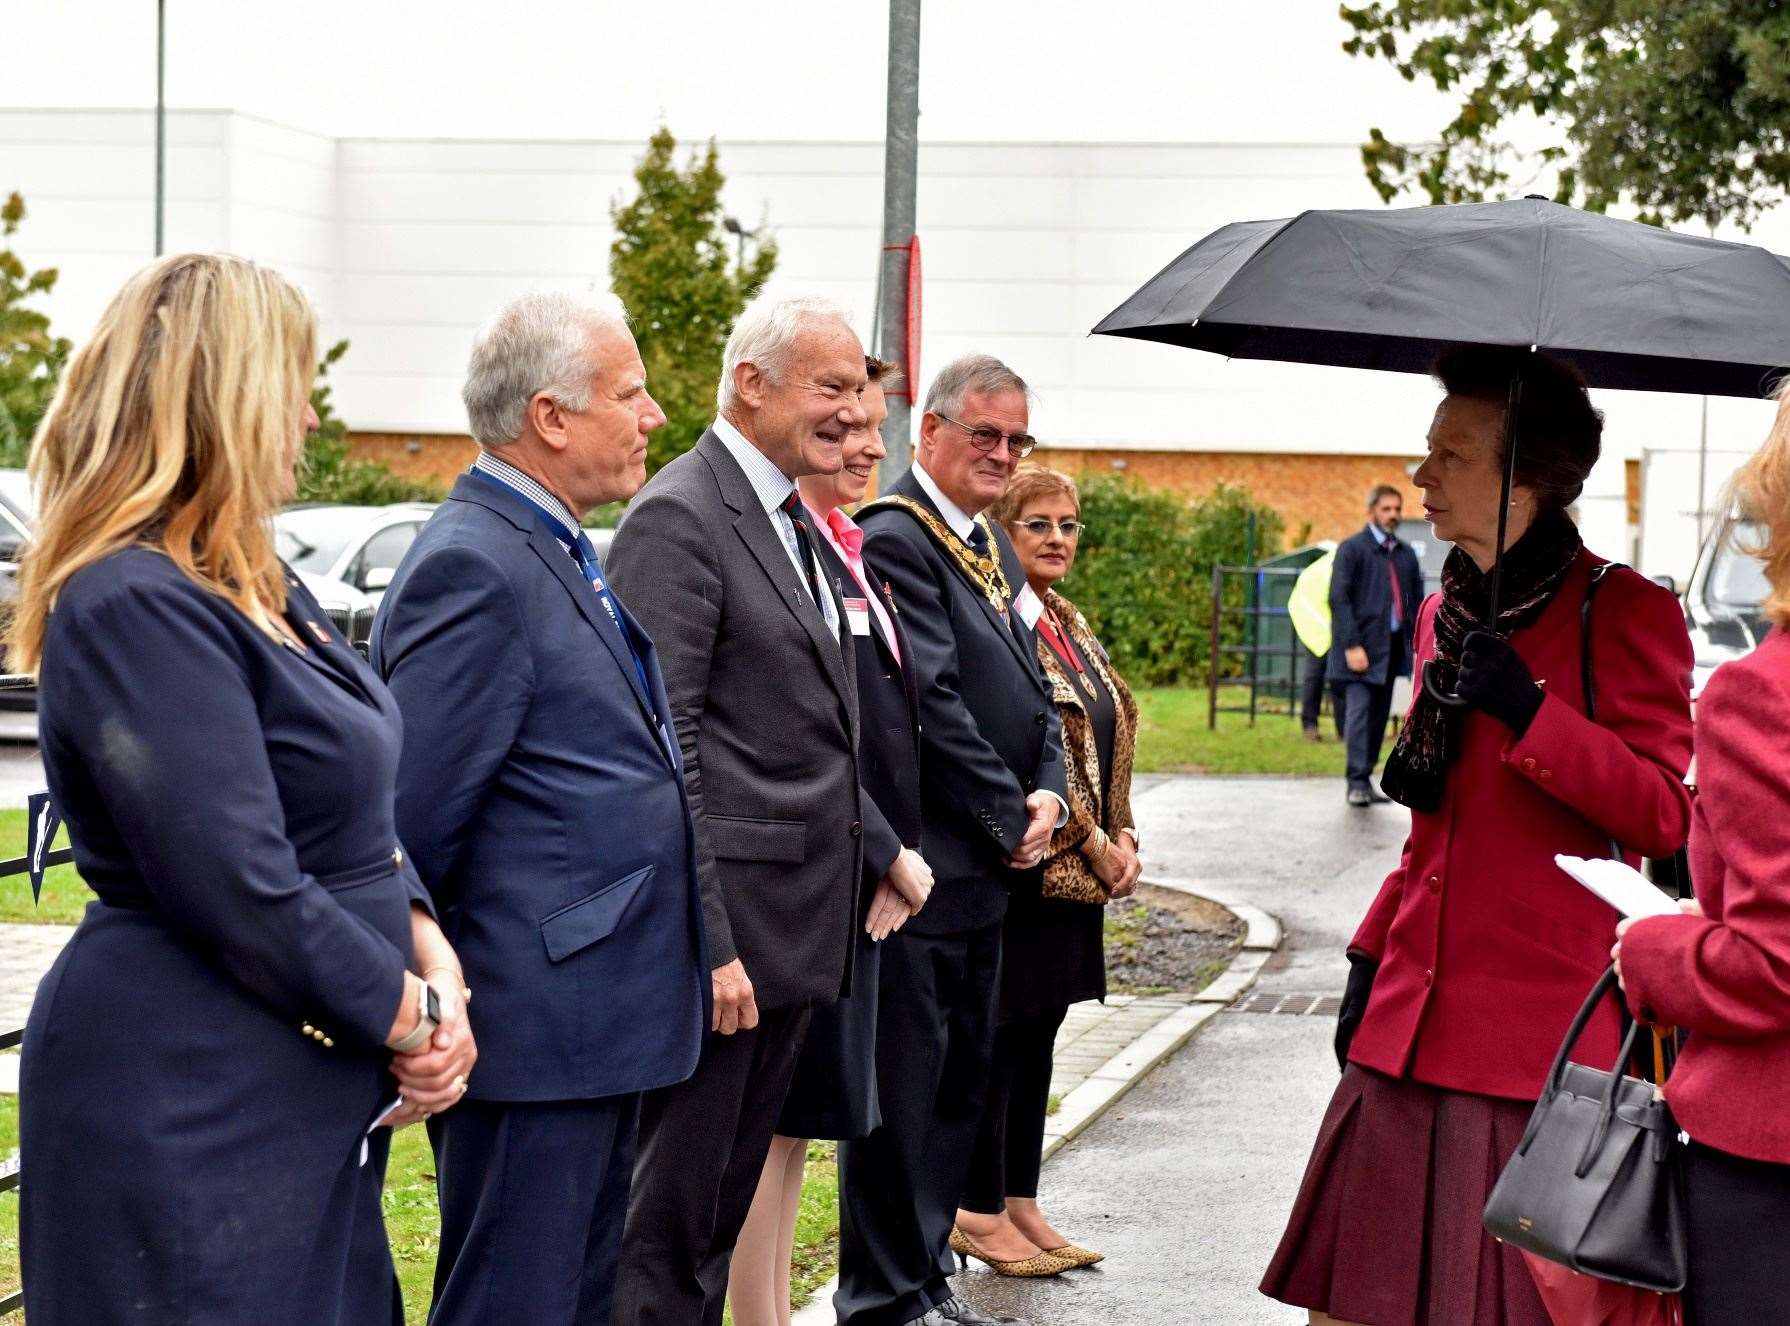 The Princess meeting local dignitaries on her arrival